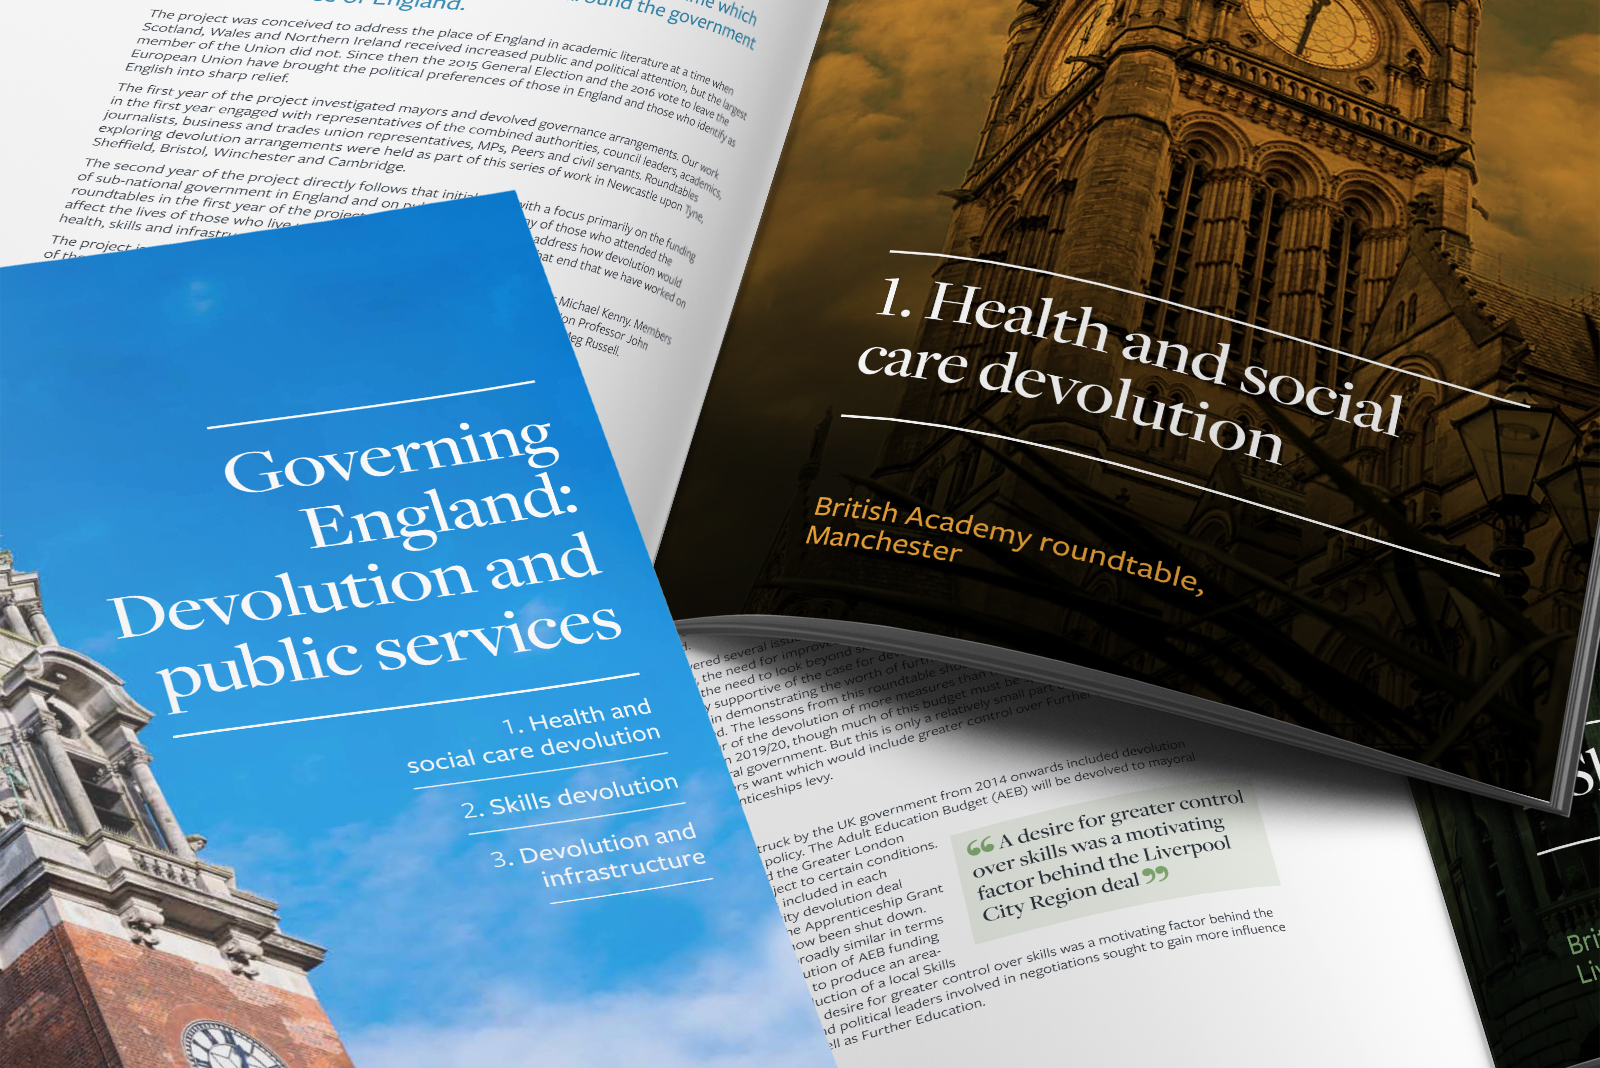 British Academy Governing England devolution and public services